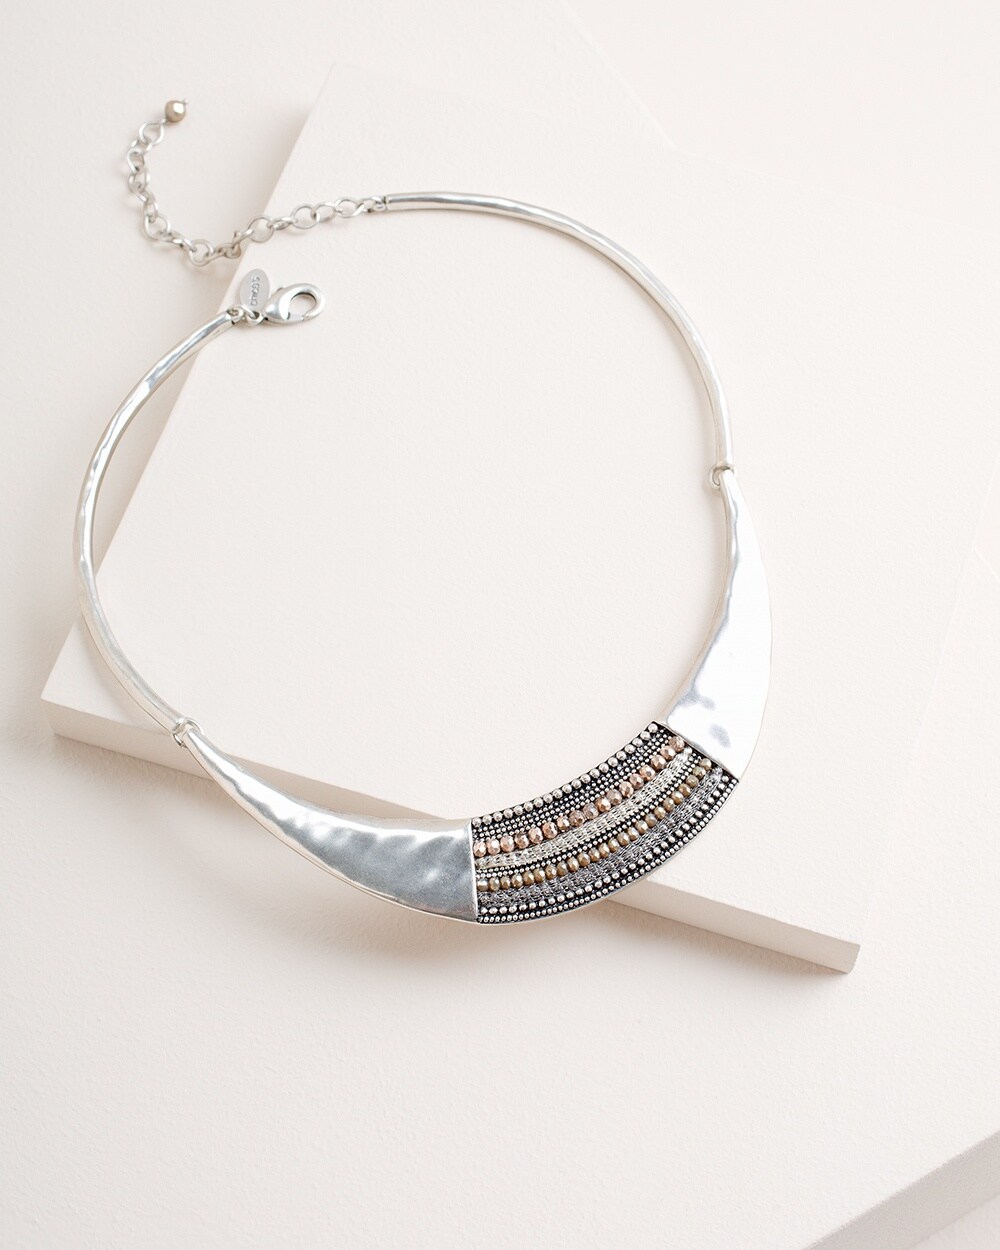 Hammered Silvertone Collar Necklace